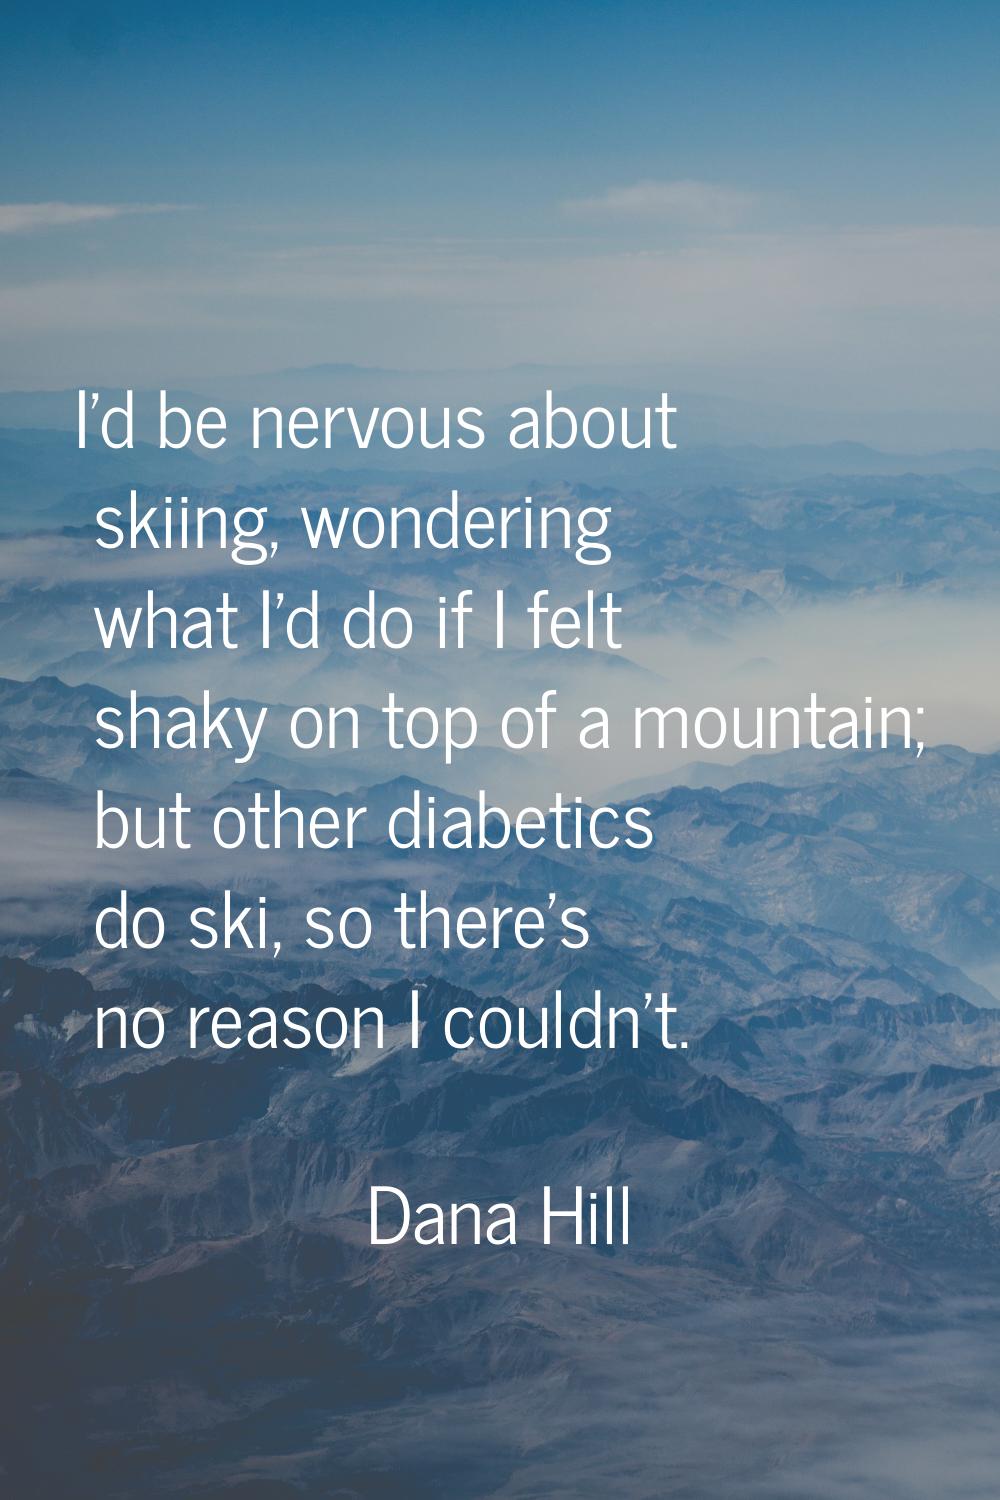 I'd be nervous about skiing, wondering what I'd do if I felt shaky on top of a mountain; but other 